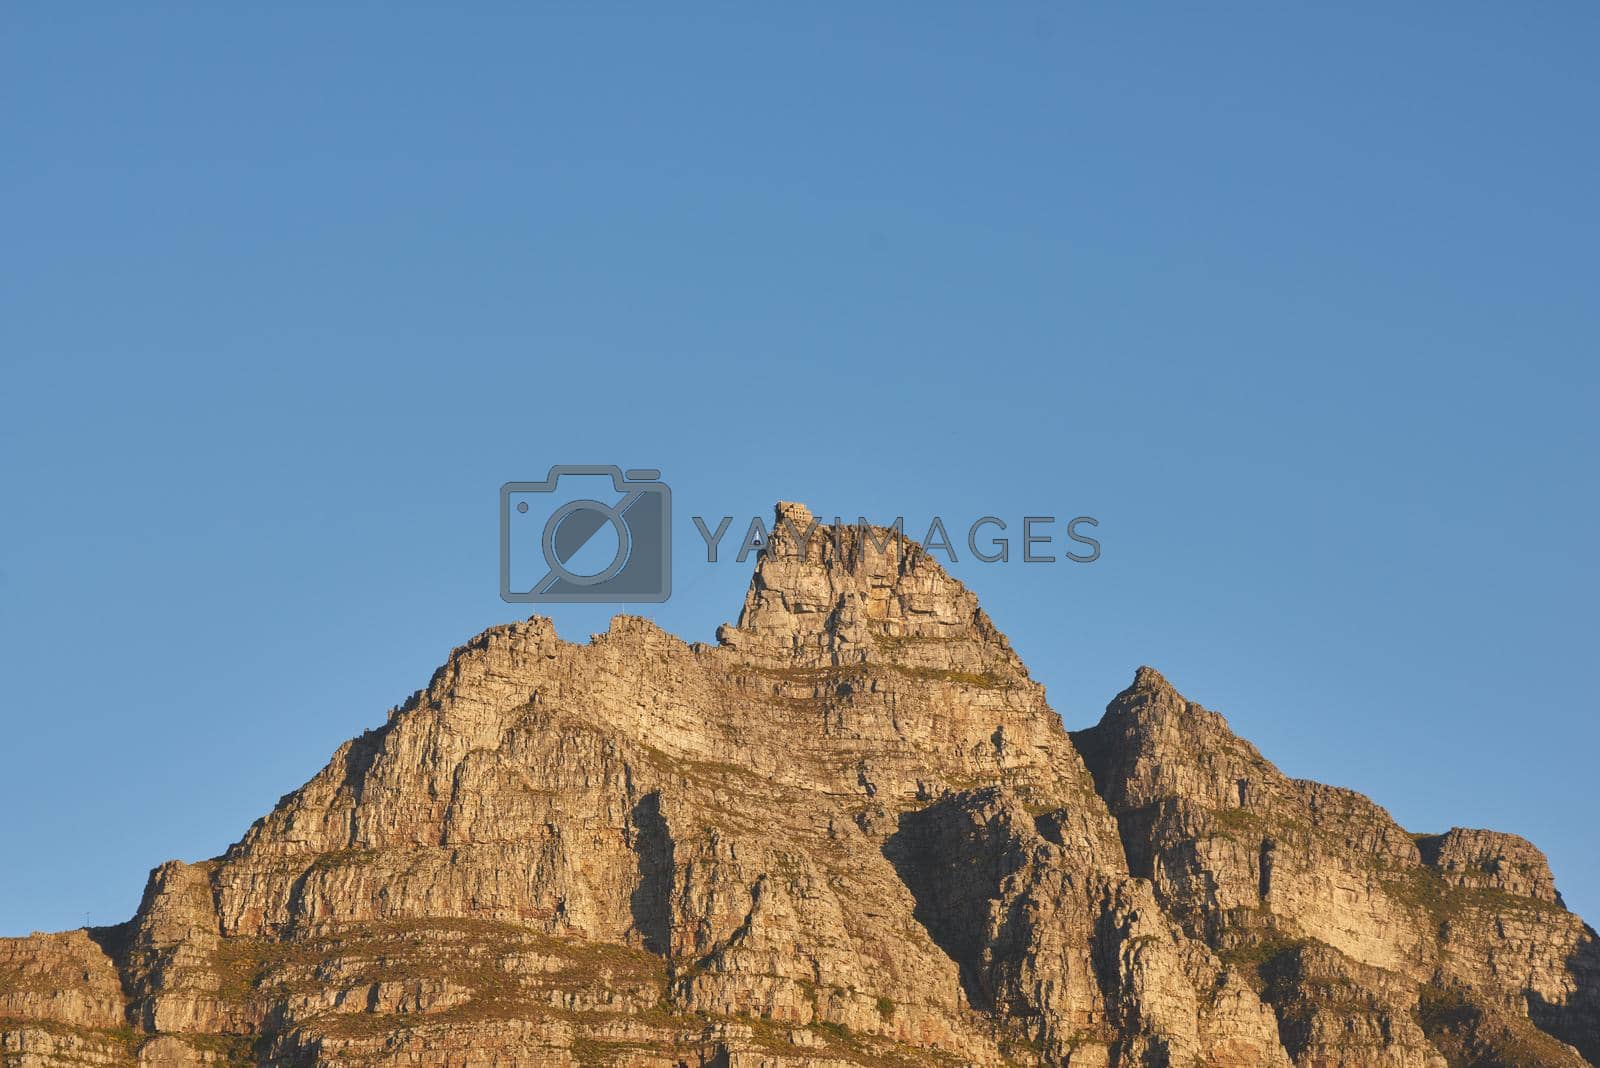 Copyspace with scenic landscape of a mountain peak against a clear blue sky on a sunny day. Scenic view of Table Mountain in Cape Town, South Africa in summer. Wide angle view of a nature background.